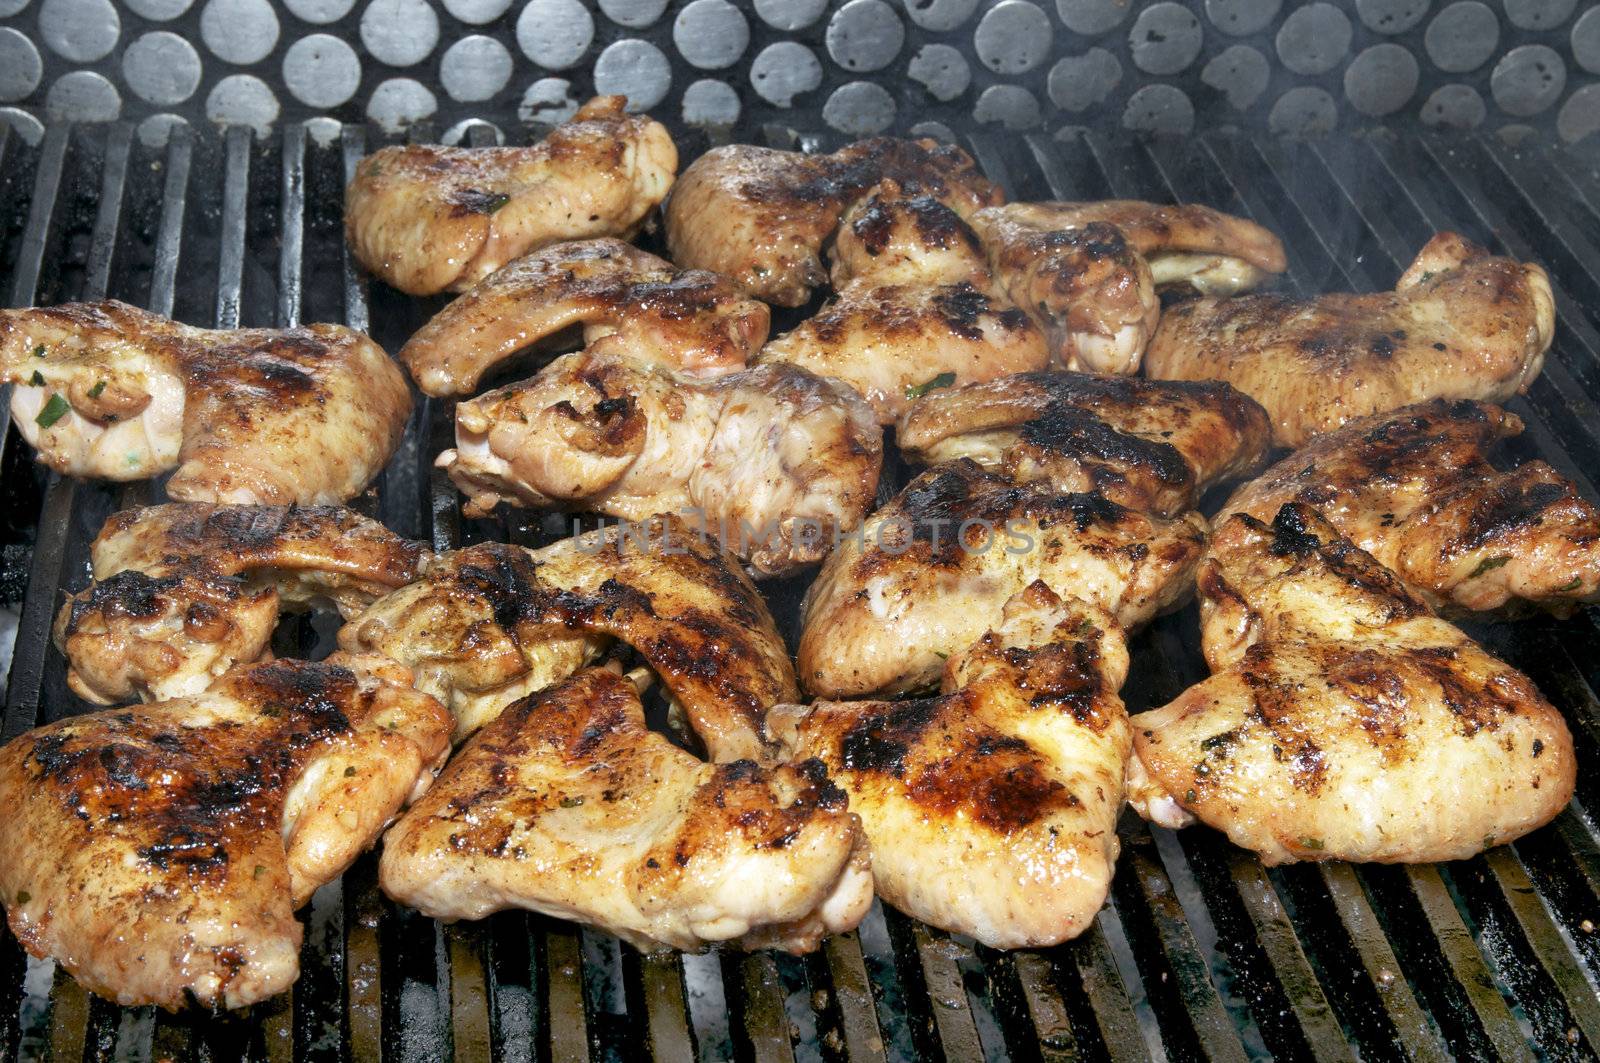 Grilled chicken wings by Lester120